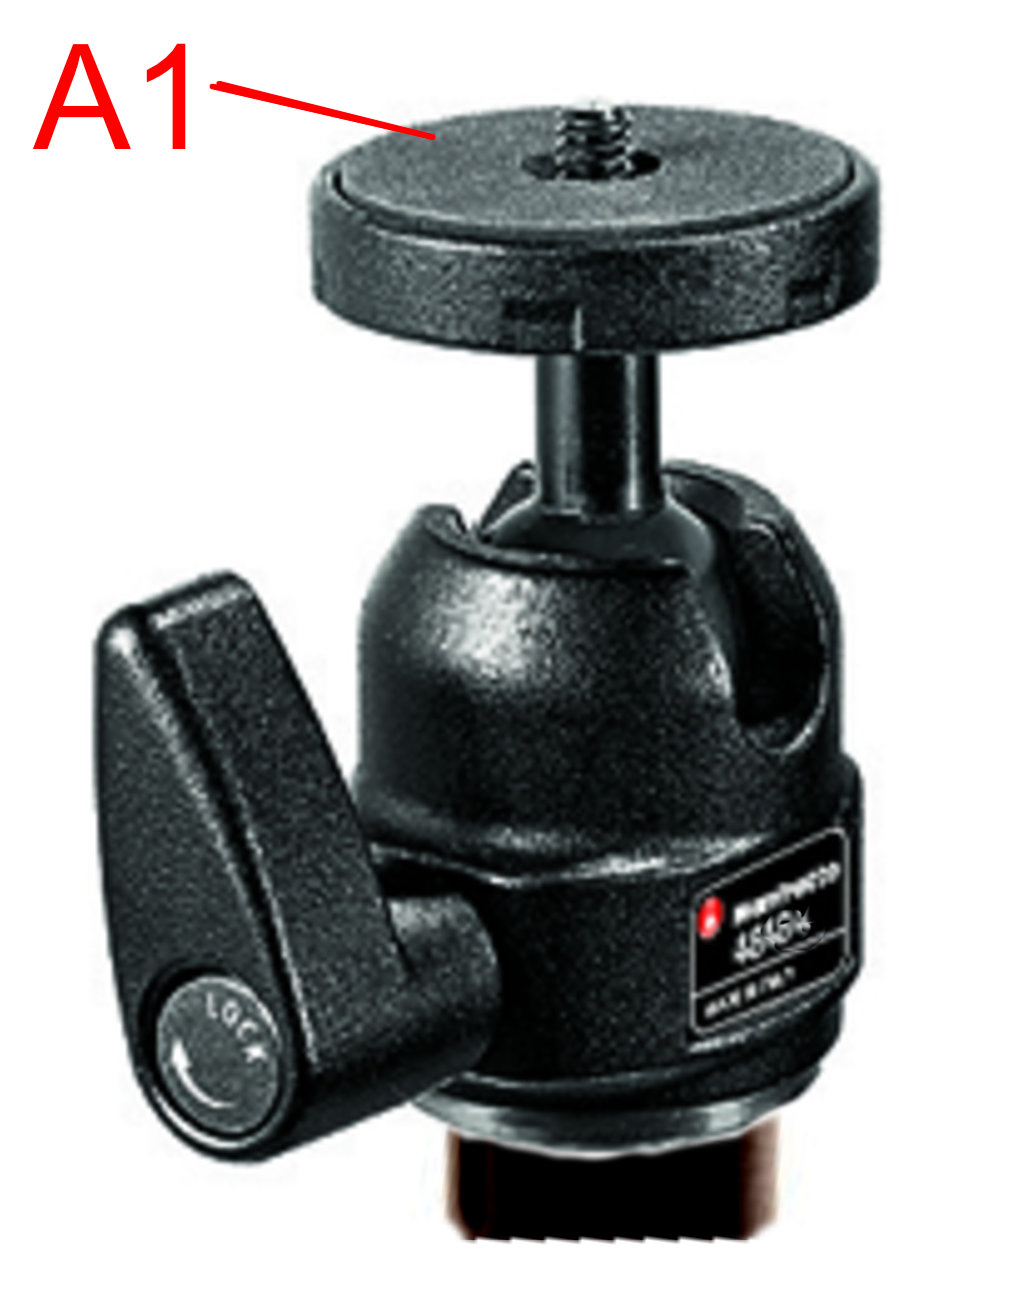 Manfrotto 482LCDRC2 Ball Head